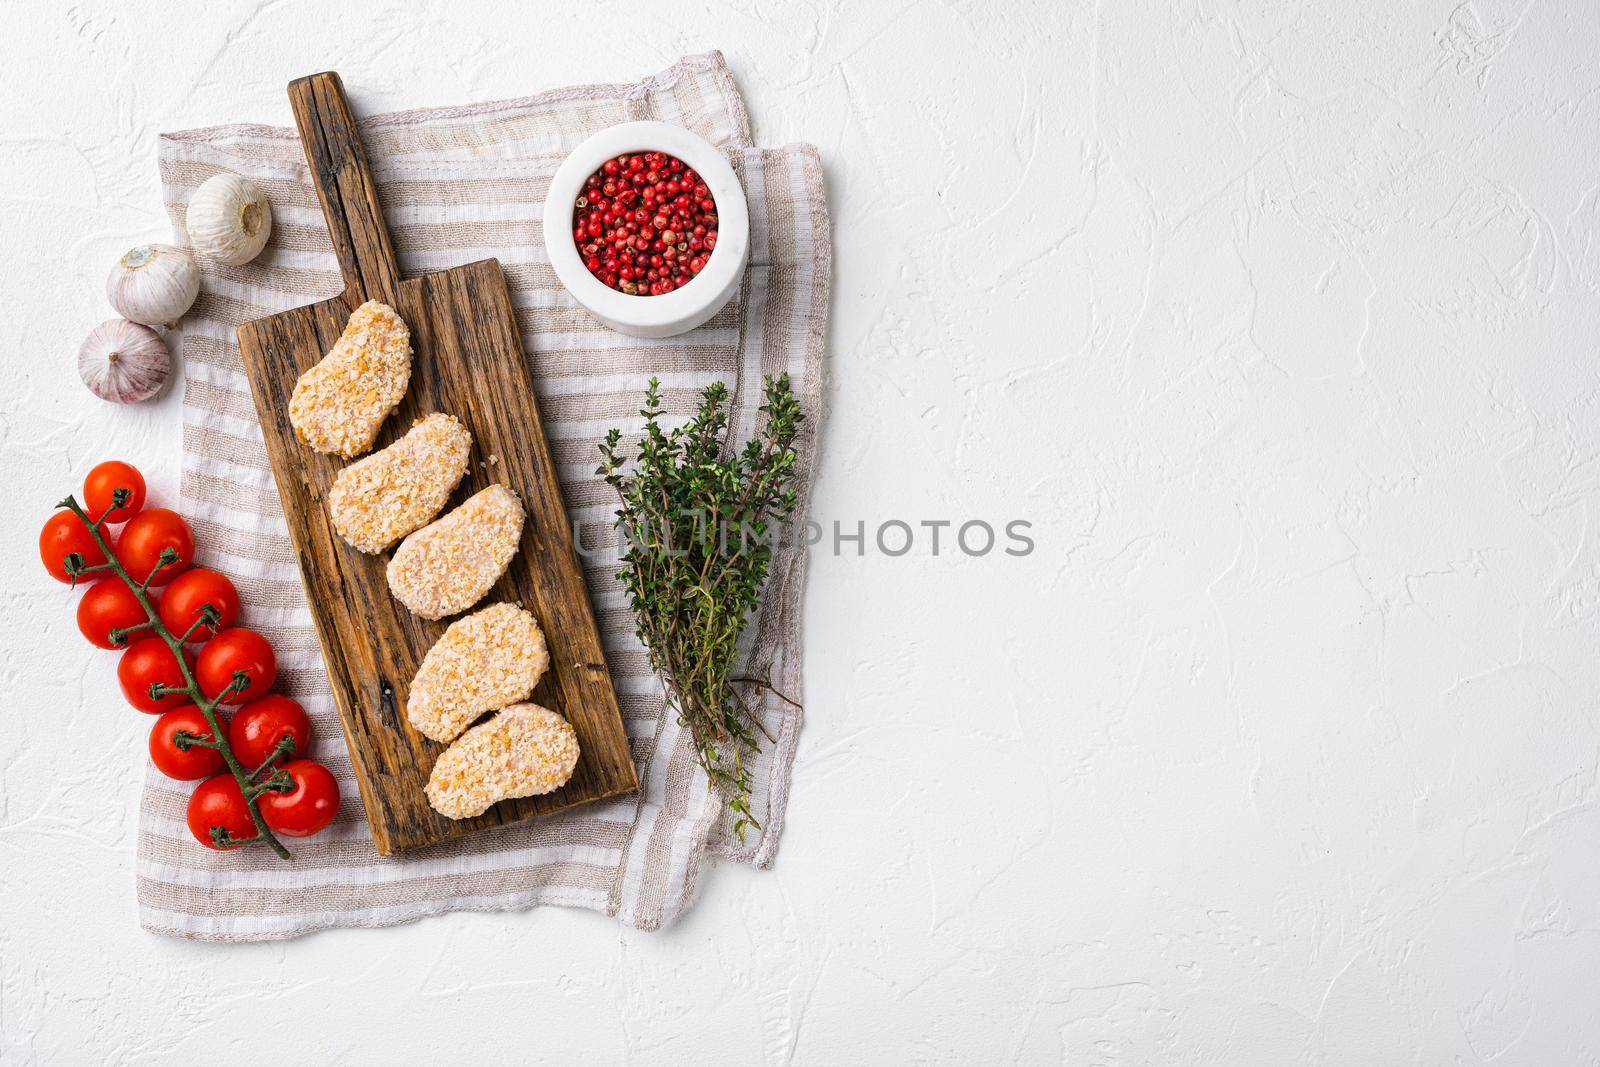 Homemade Raw Breaded Chicken Nuggets set, on white stone table background, top view flat lay, with copy space for text by Ilianesolenyi